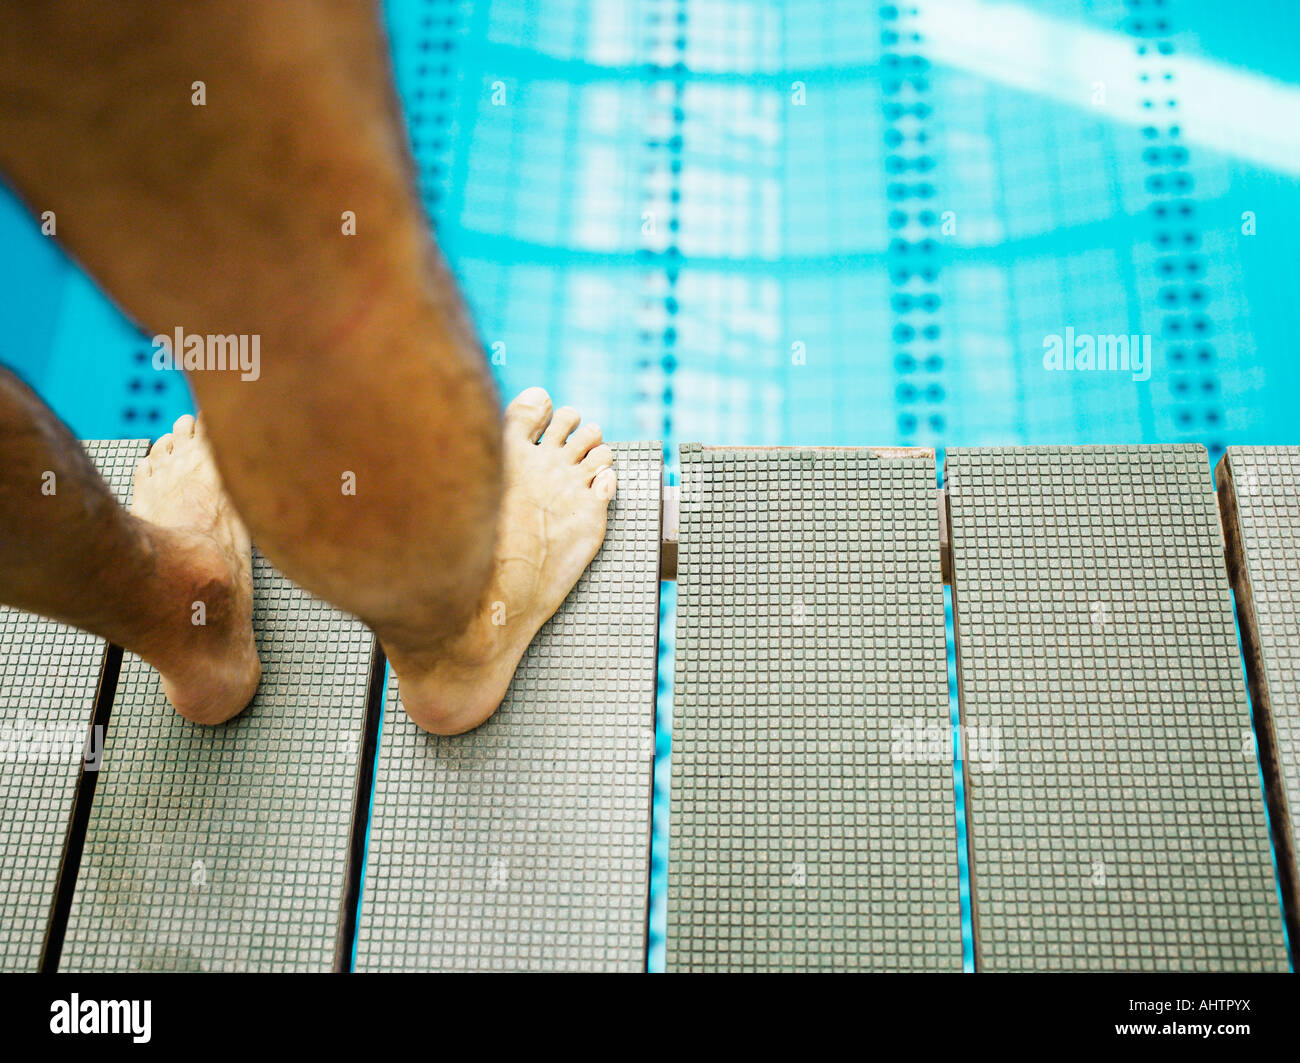 Man standing on diving board, close-up, low section Stock Photo